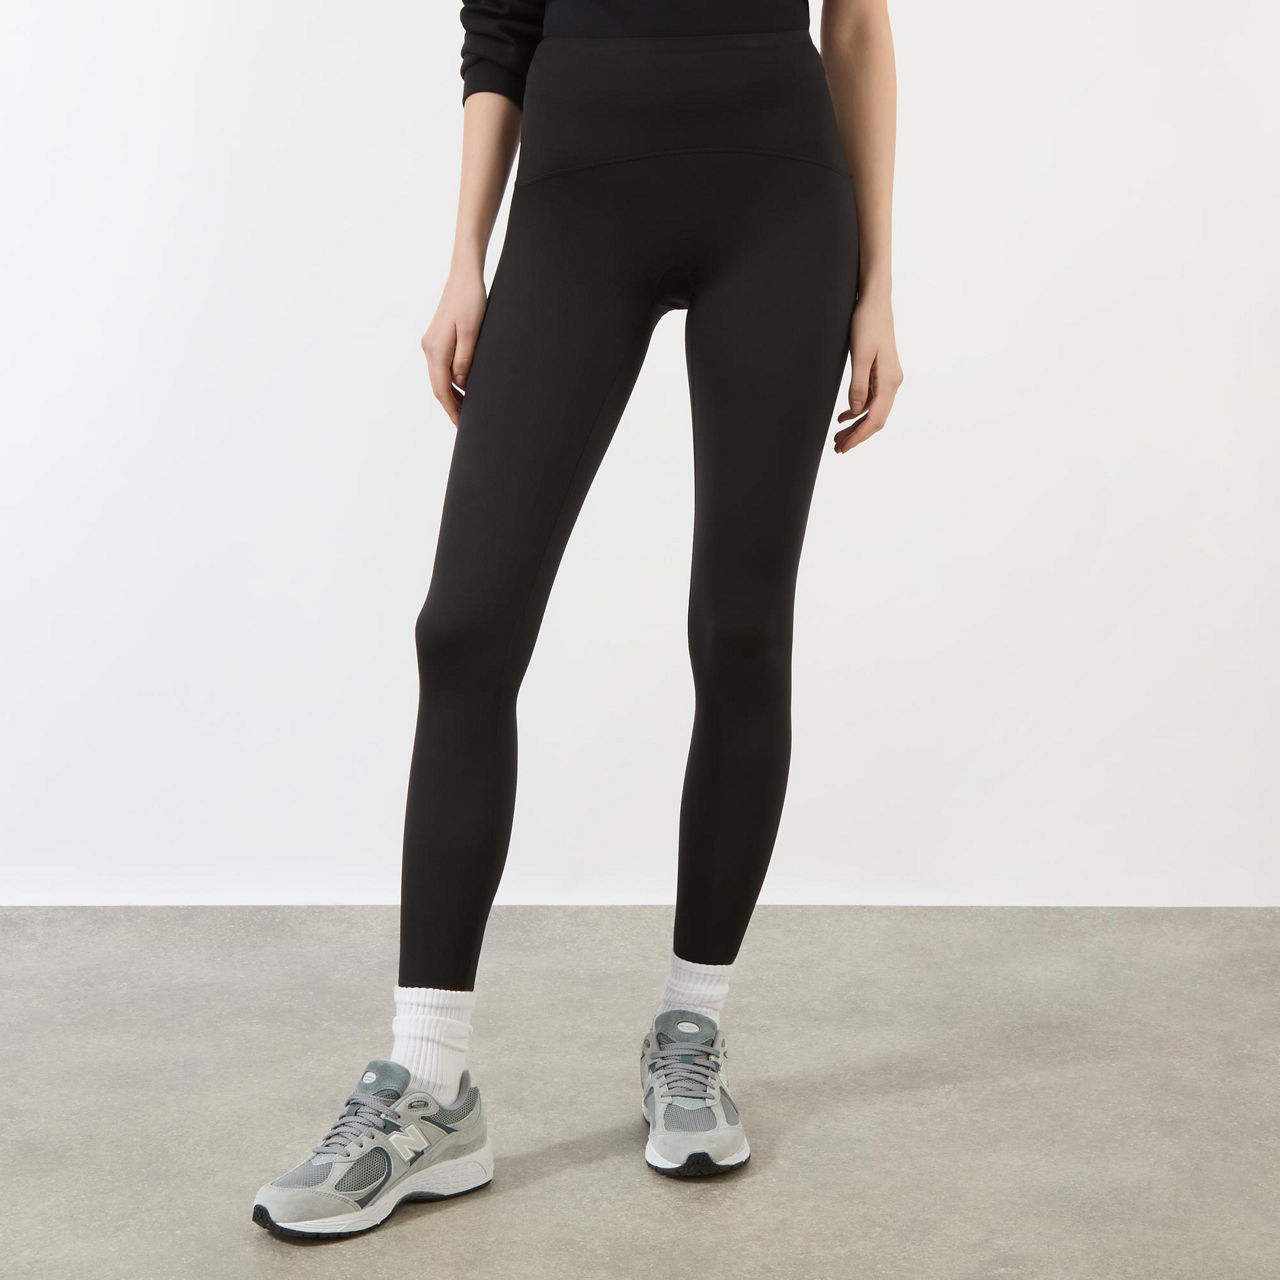 Spanx Booty Boost Active Leggings, Very Black at John Lewis & Partners